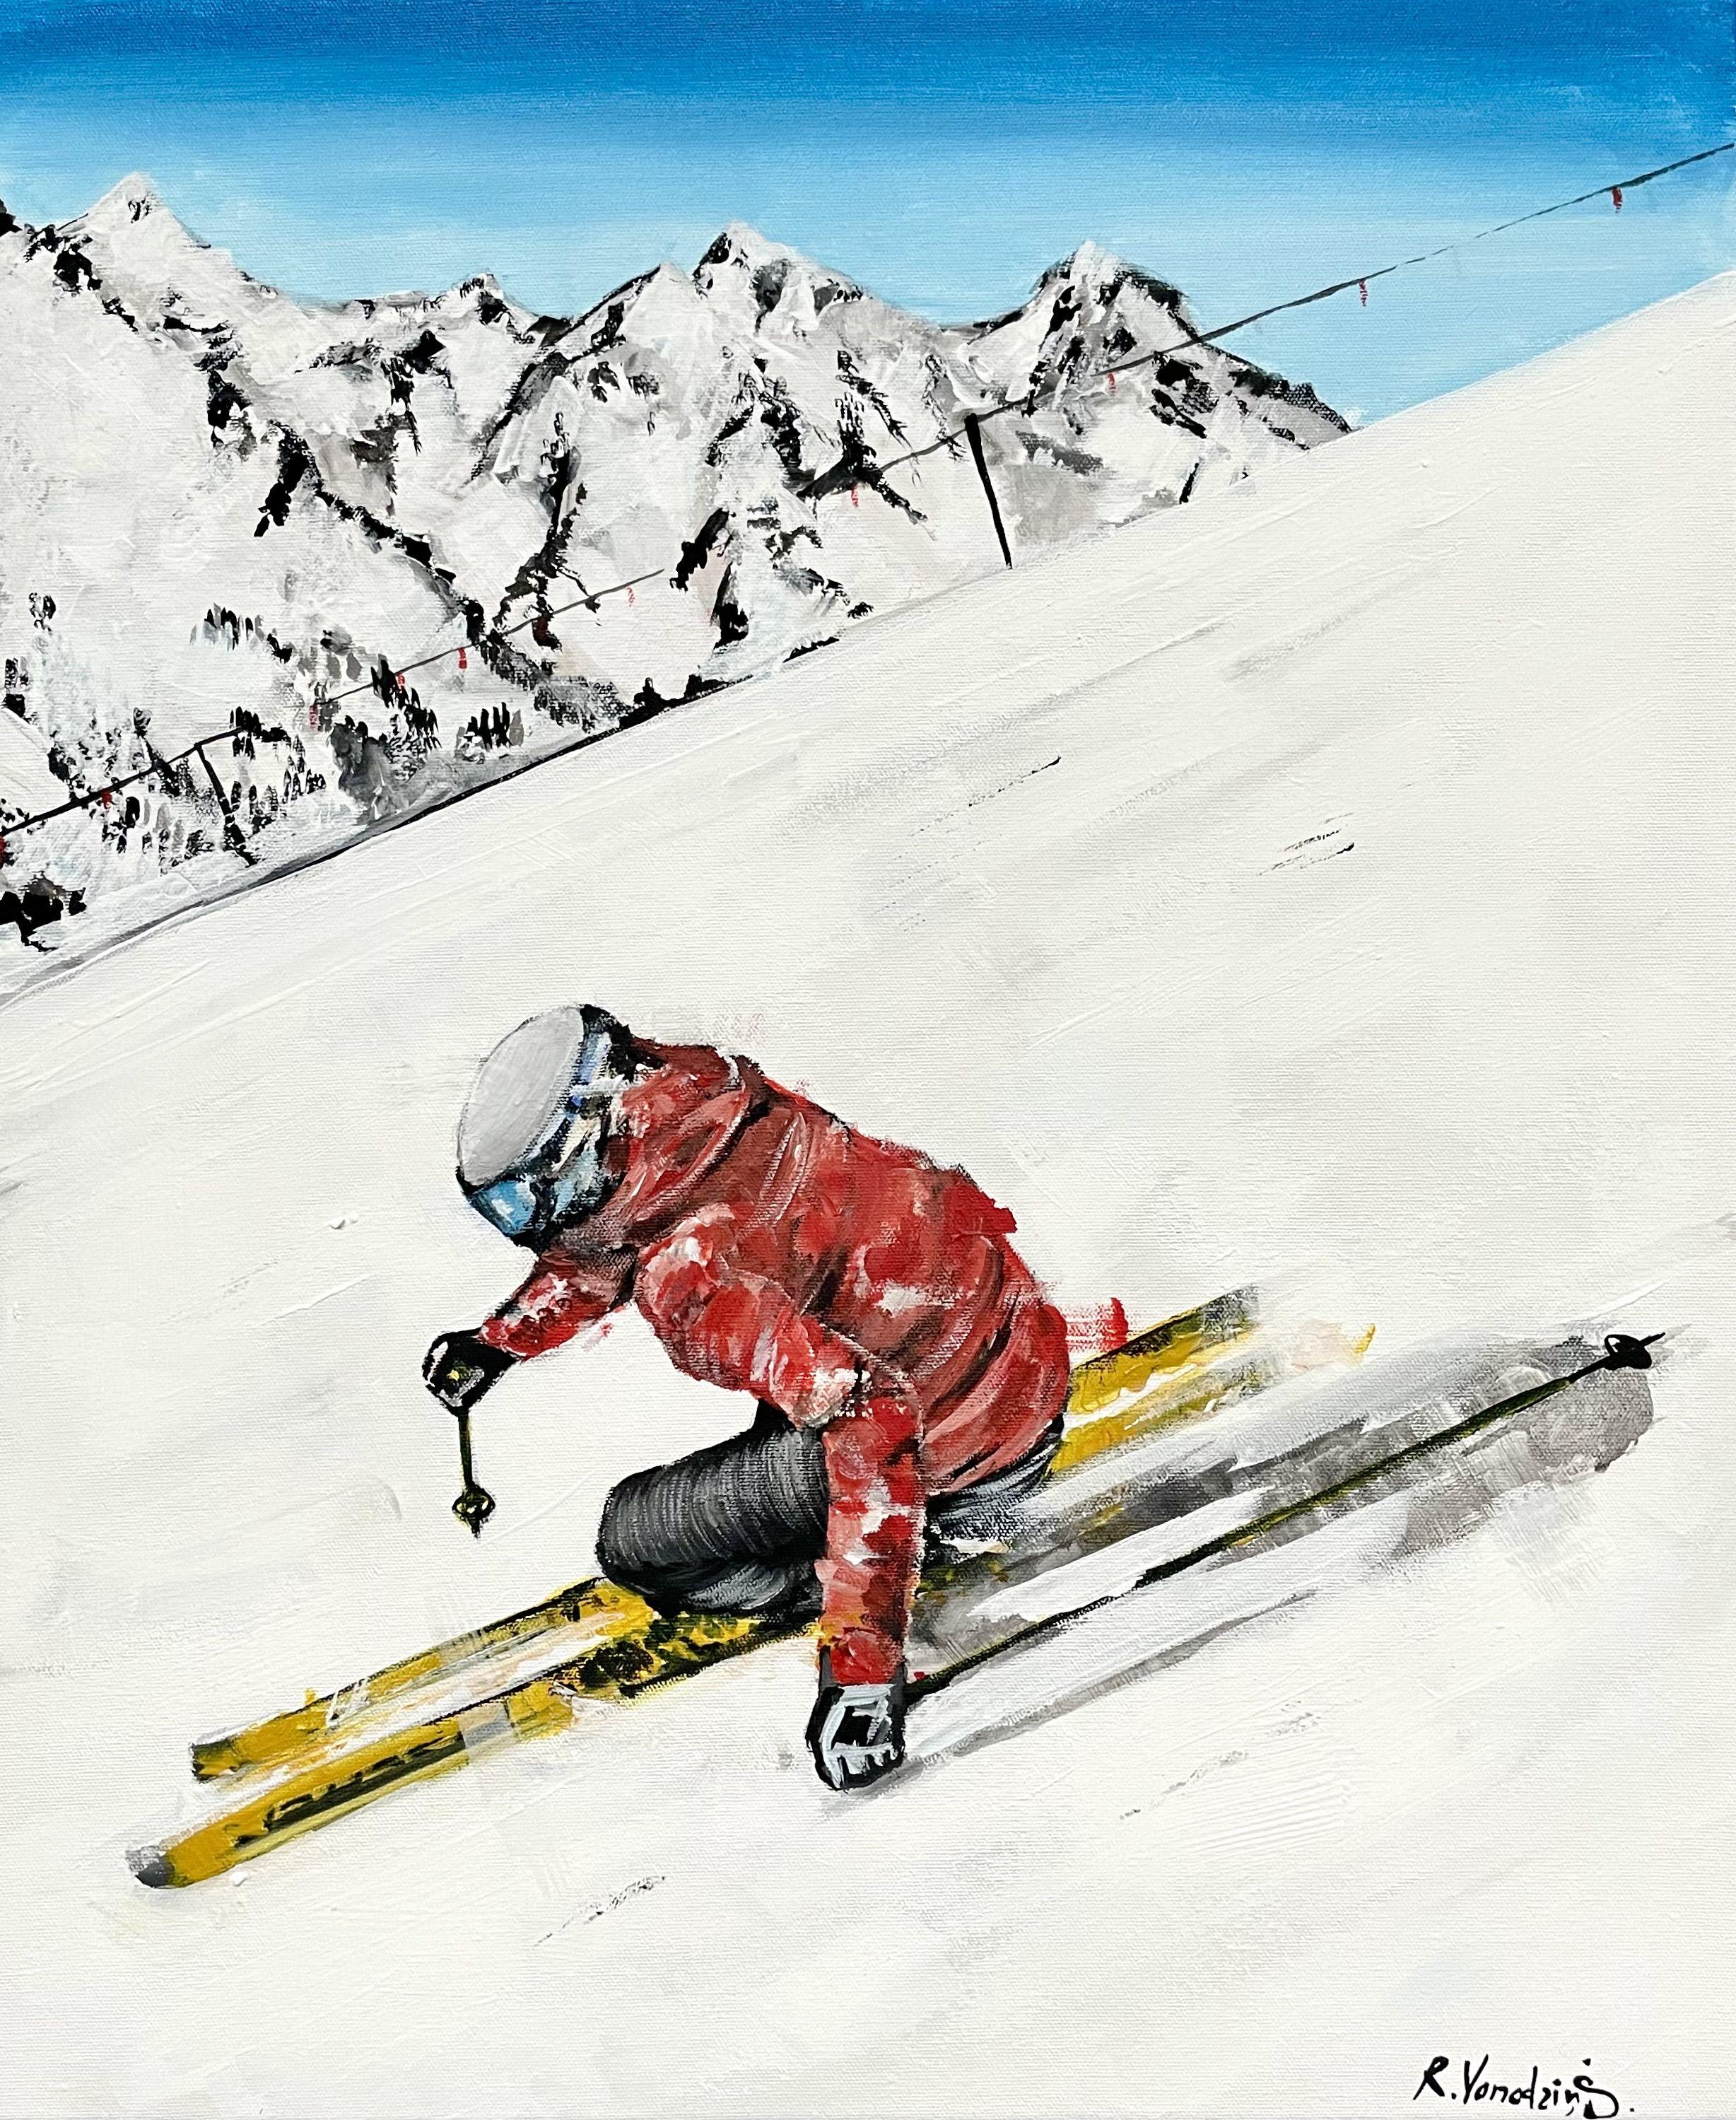 Original Ski Sport Painting on Canvas. Man skier running downhill on sunny Alps slope. He is a happy person in a red jacket who enjoys skiing down a slope on a happy Sunday morning. :: Painting :: Americana :: This piece comes with an official